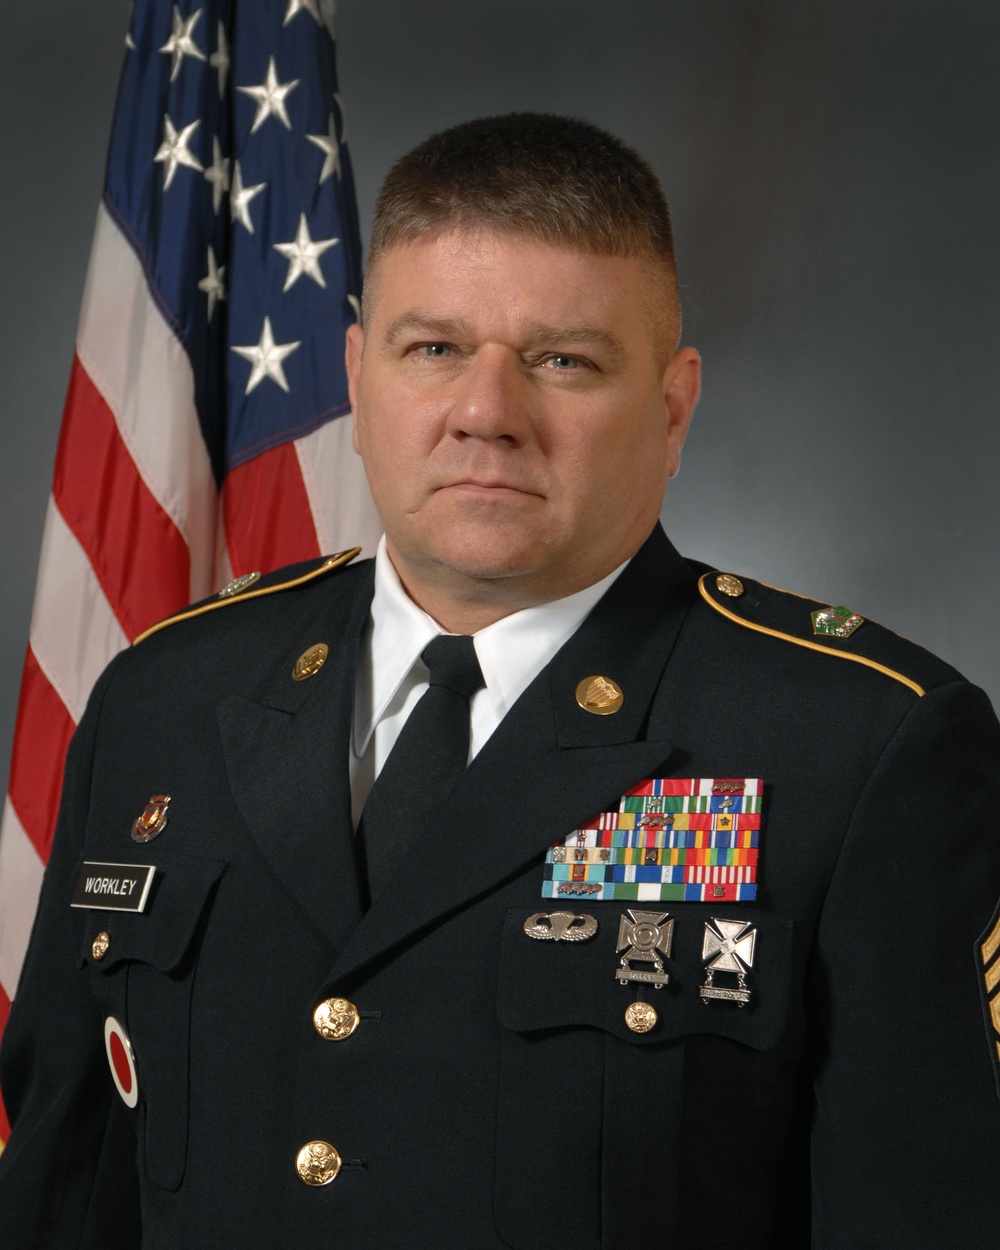 Ohio National Guard senior enlisted leader brings traditional Guard perspective to key position